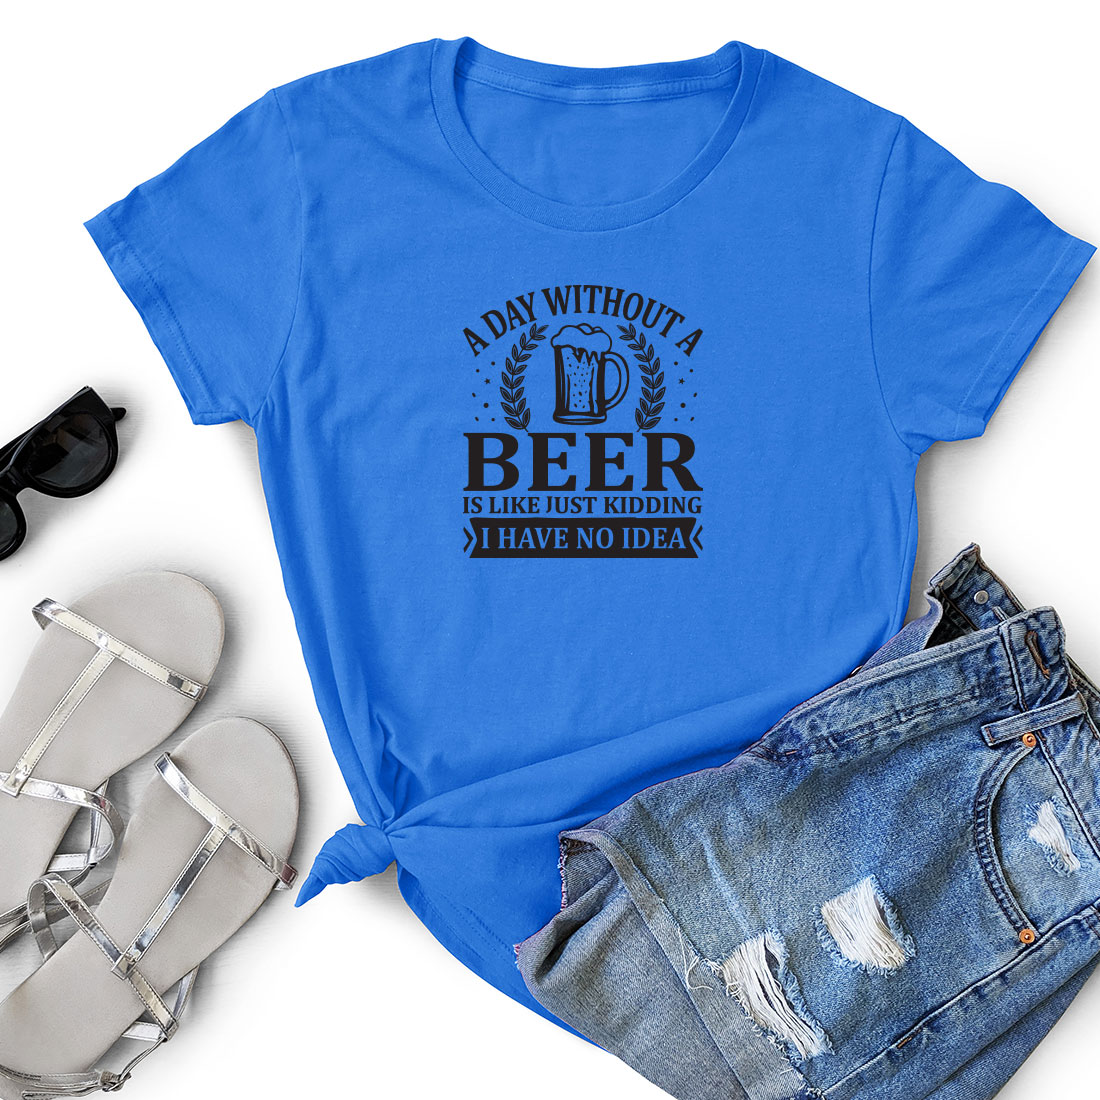 Women's t - shirt that says a day without a beer is like.